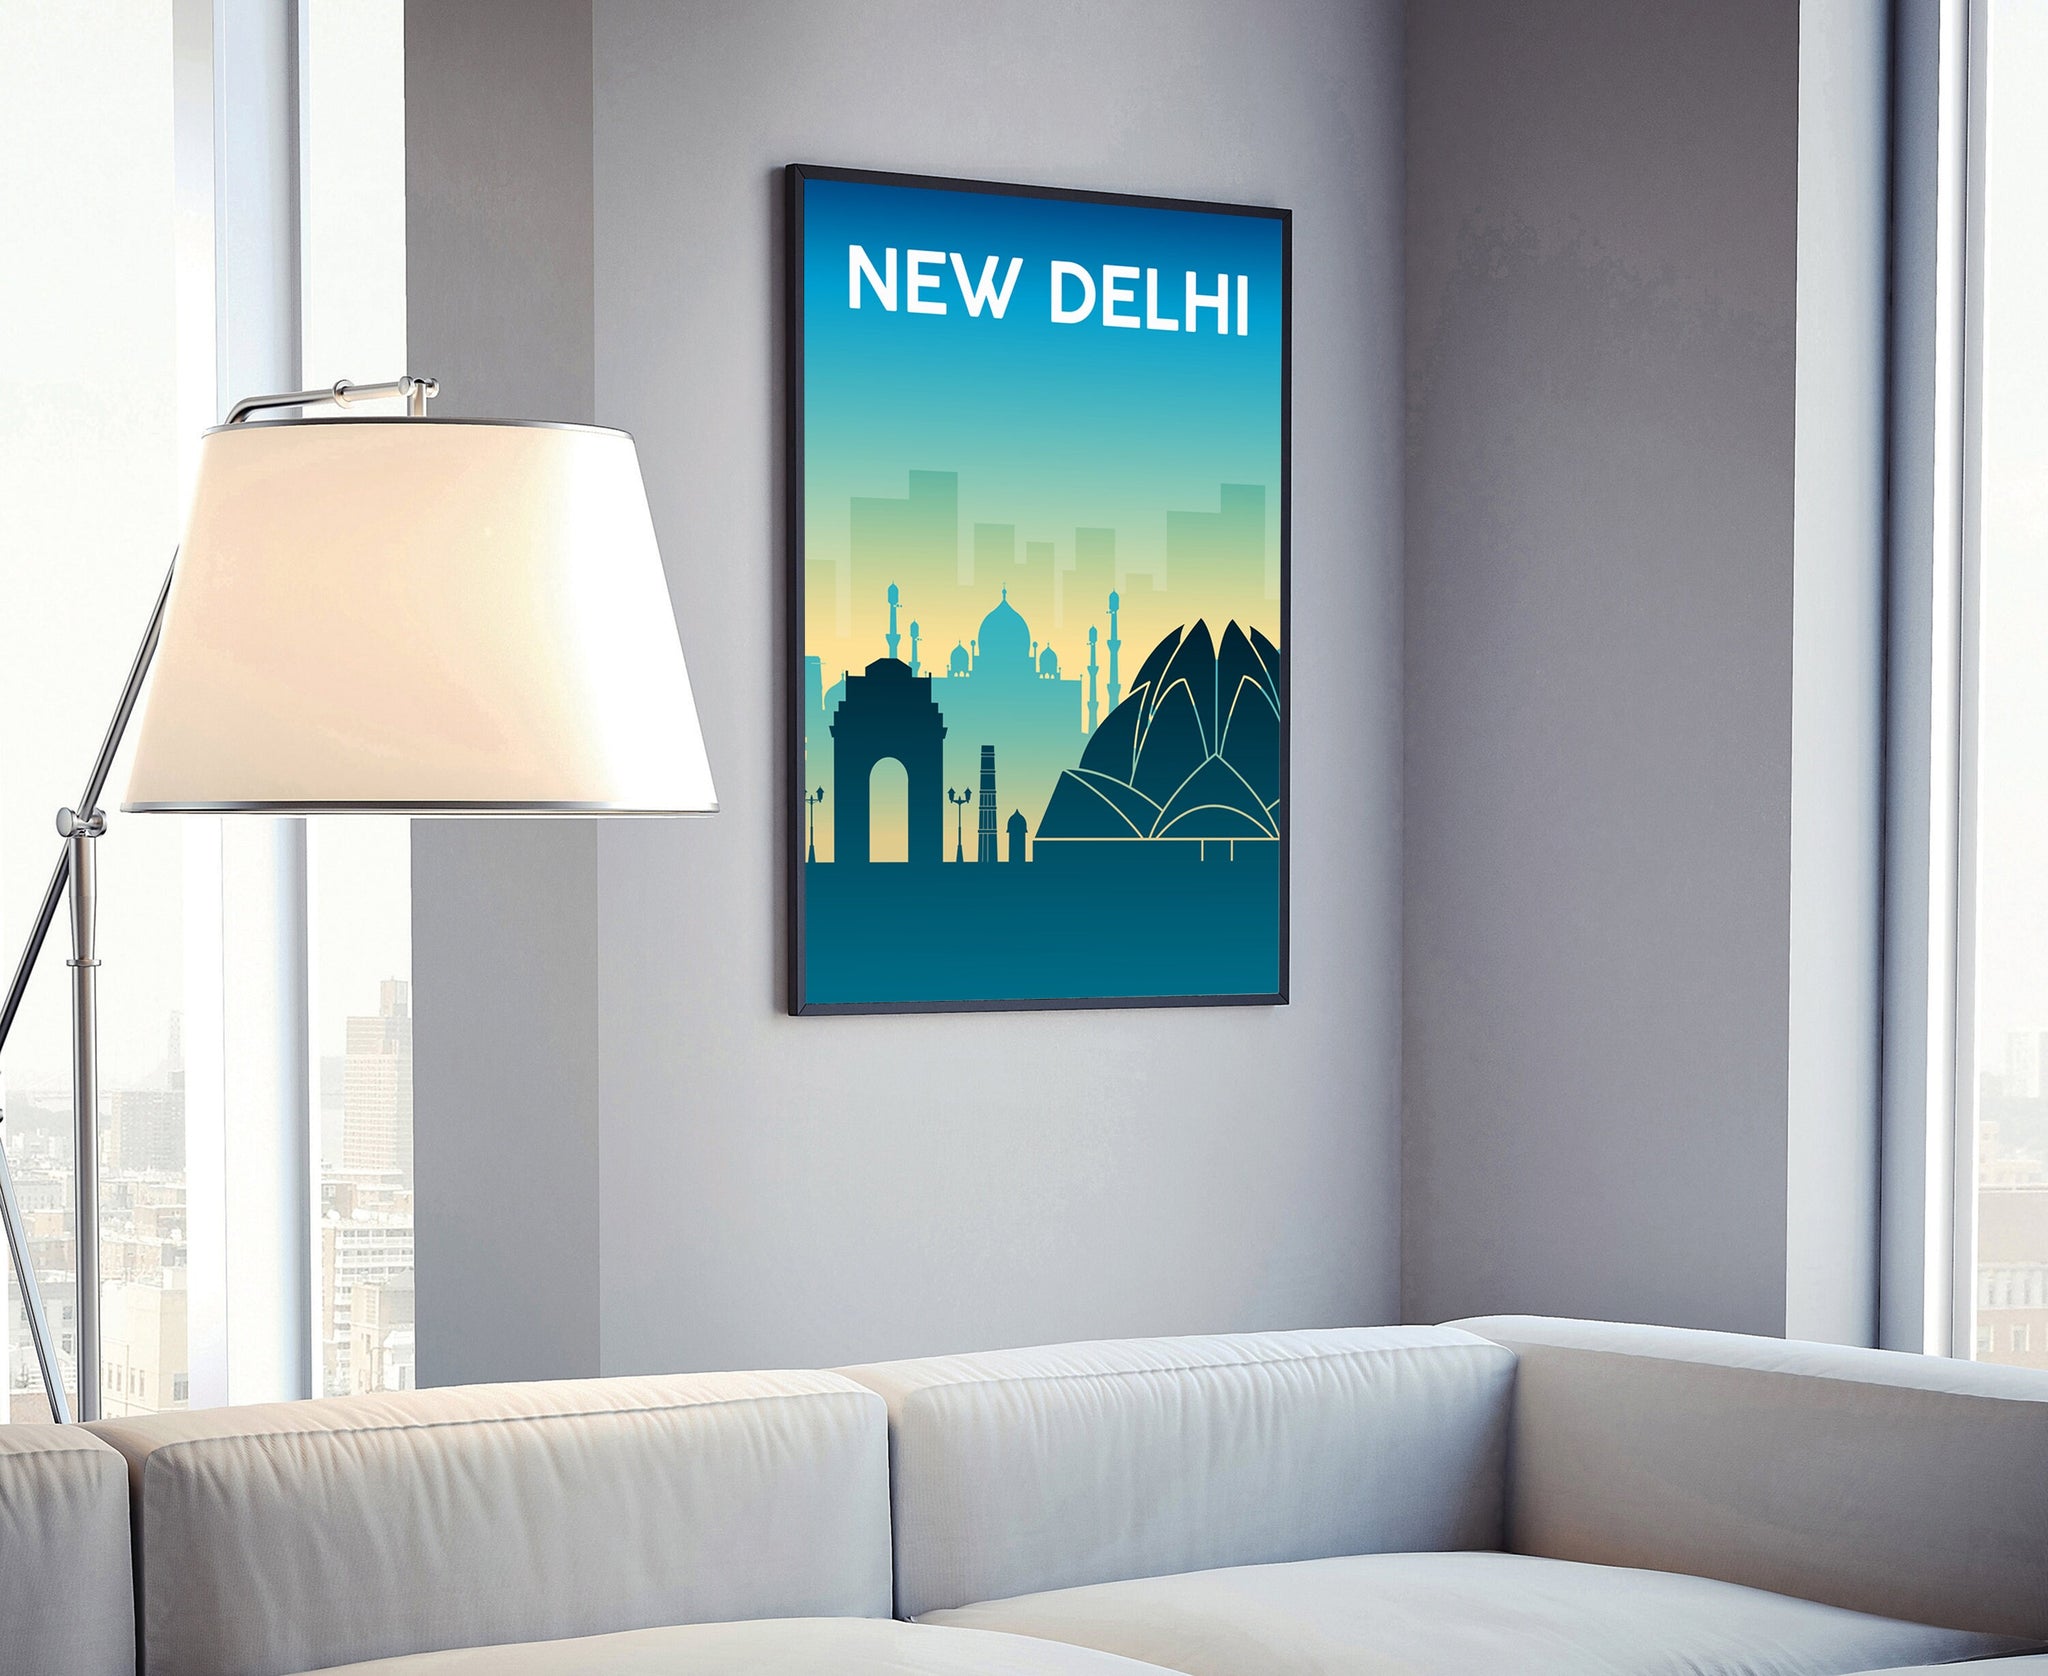 Solid Color World City Poster, India New Delhi Solid Color Modern Poster Print, New Delhi Modern City Poster, Office Wall Decoration